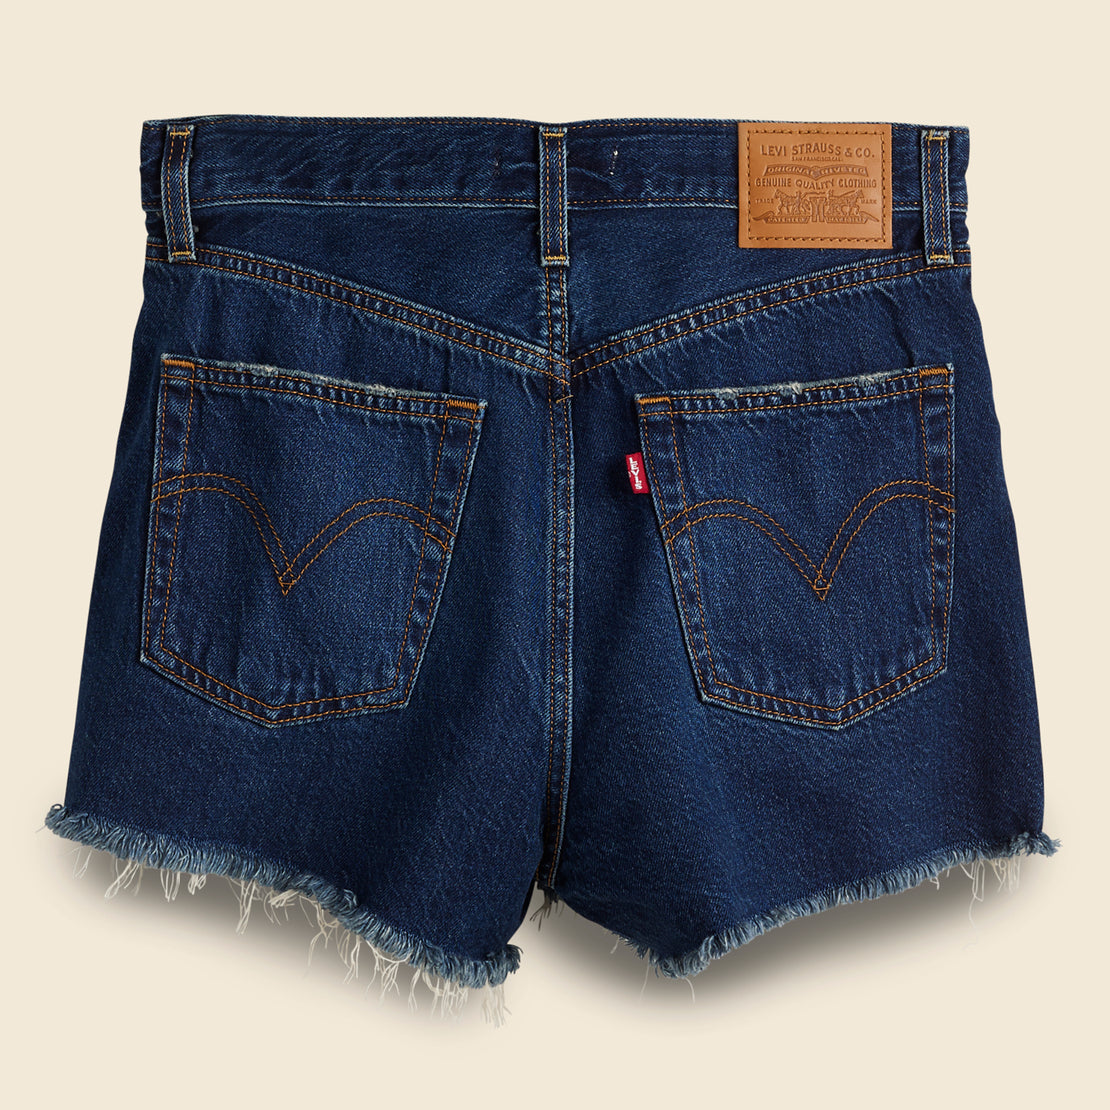 Ribcage Short - Noe Five - Levis Premium - STAG Provisions - W - Shorts - Solid